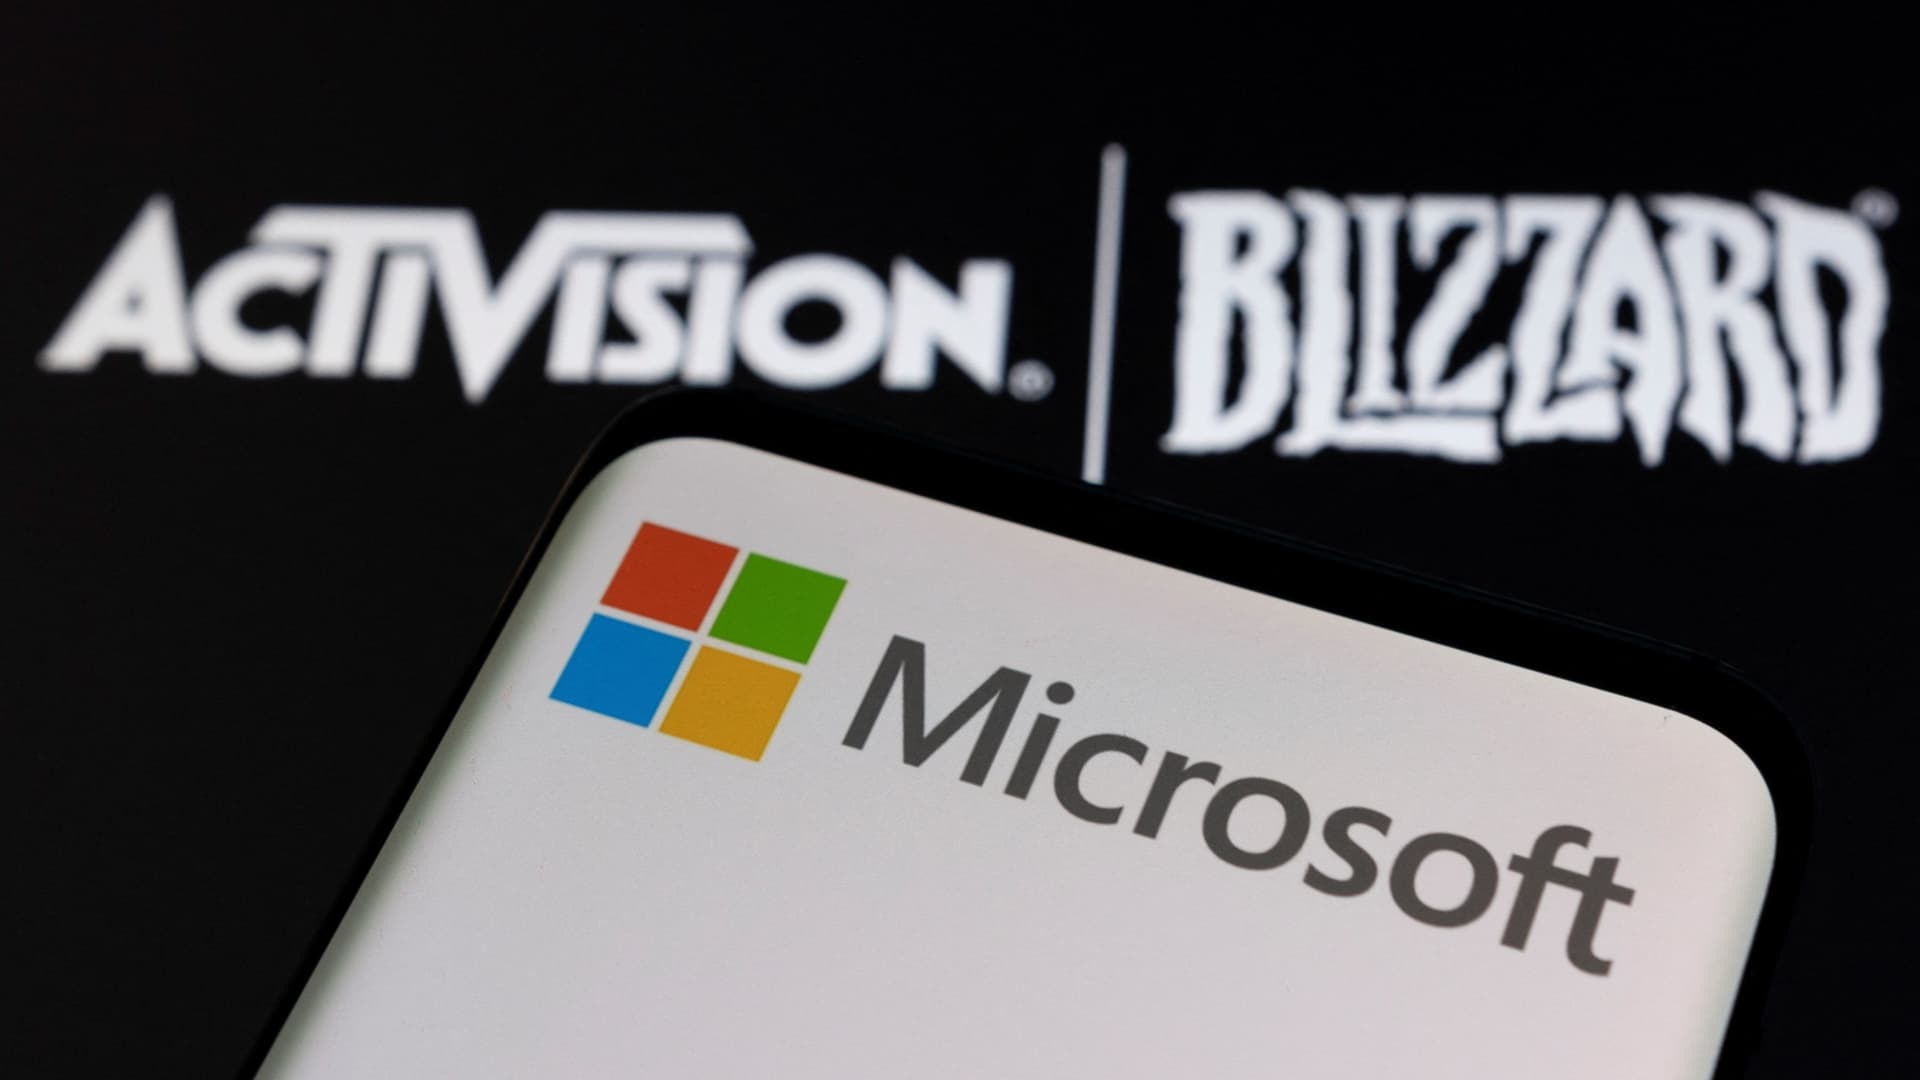 Atlantic Equities upgrades Activision Blizzard, says approval of Microsoft deal can spark rally